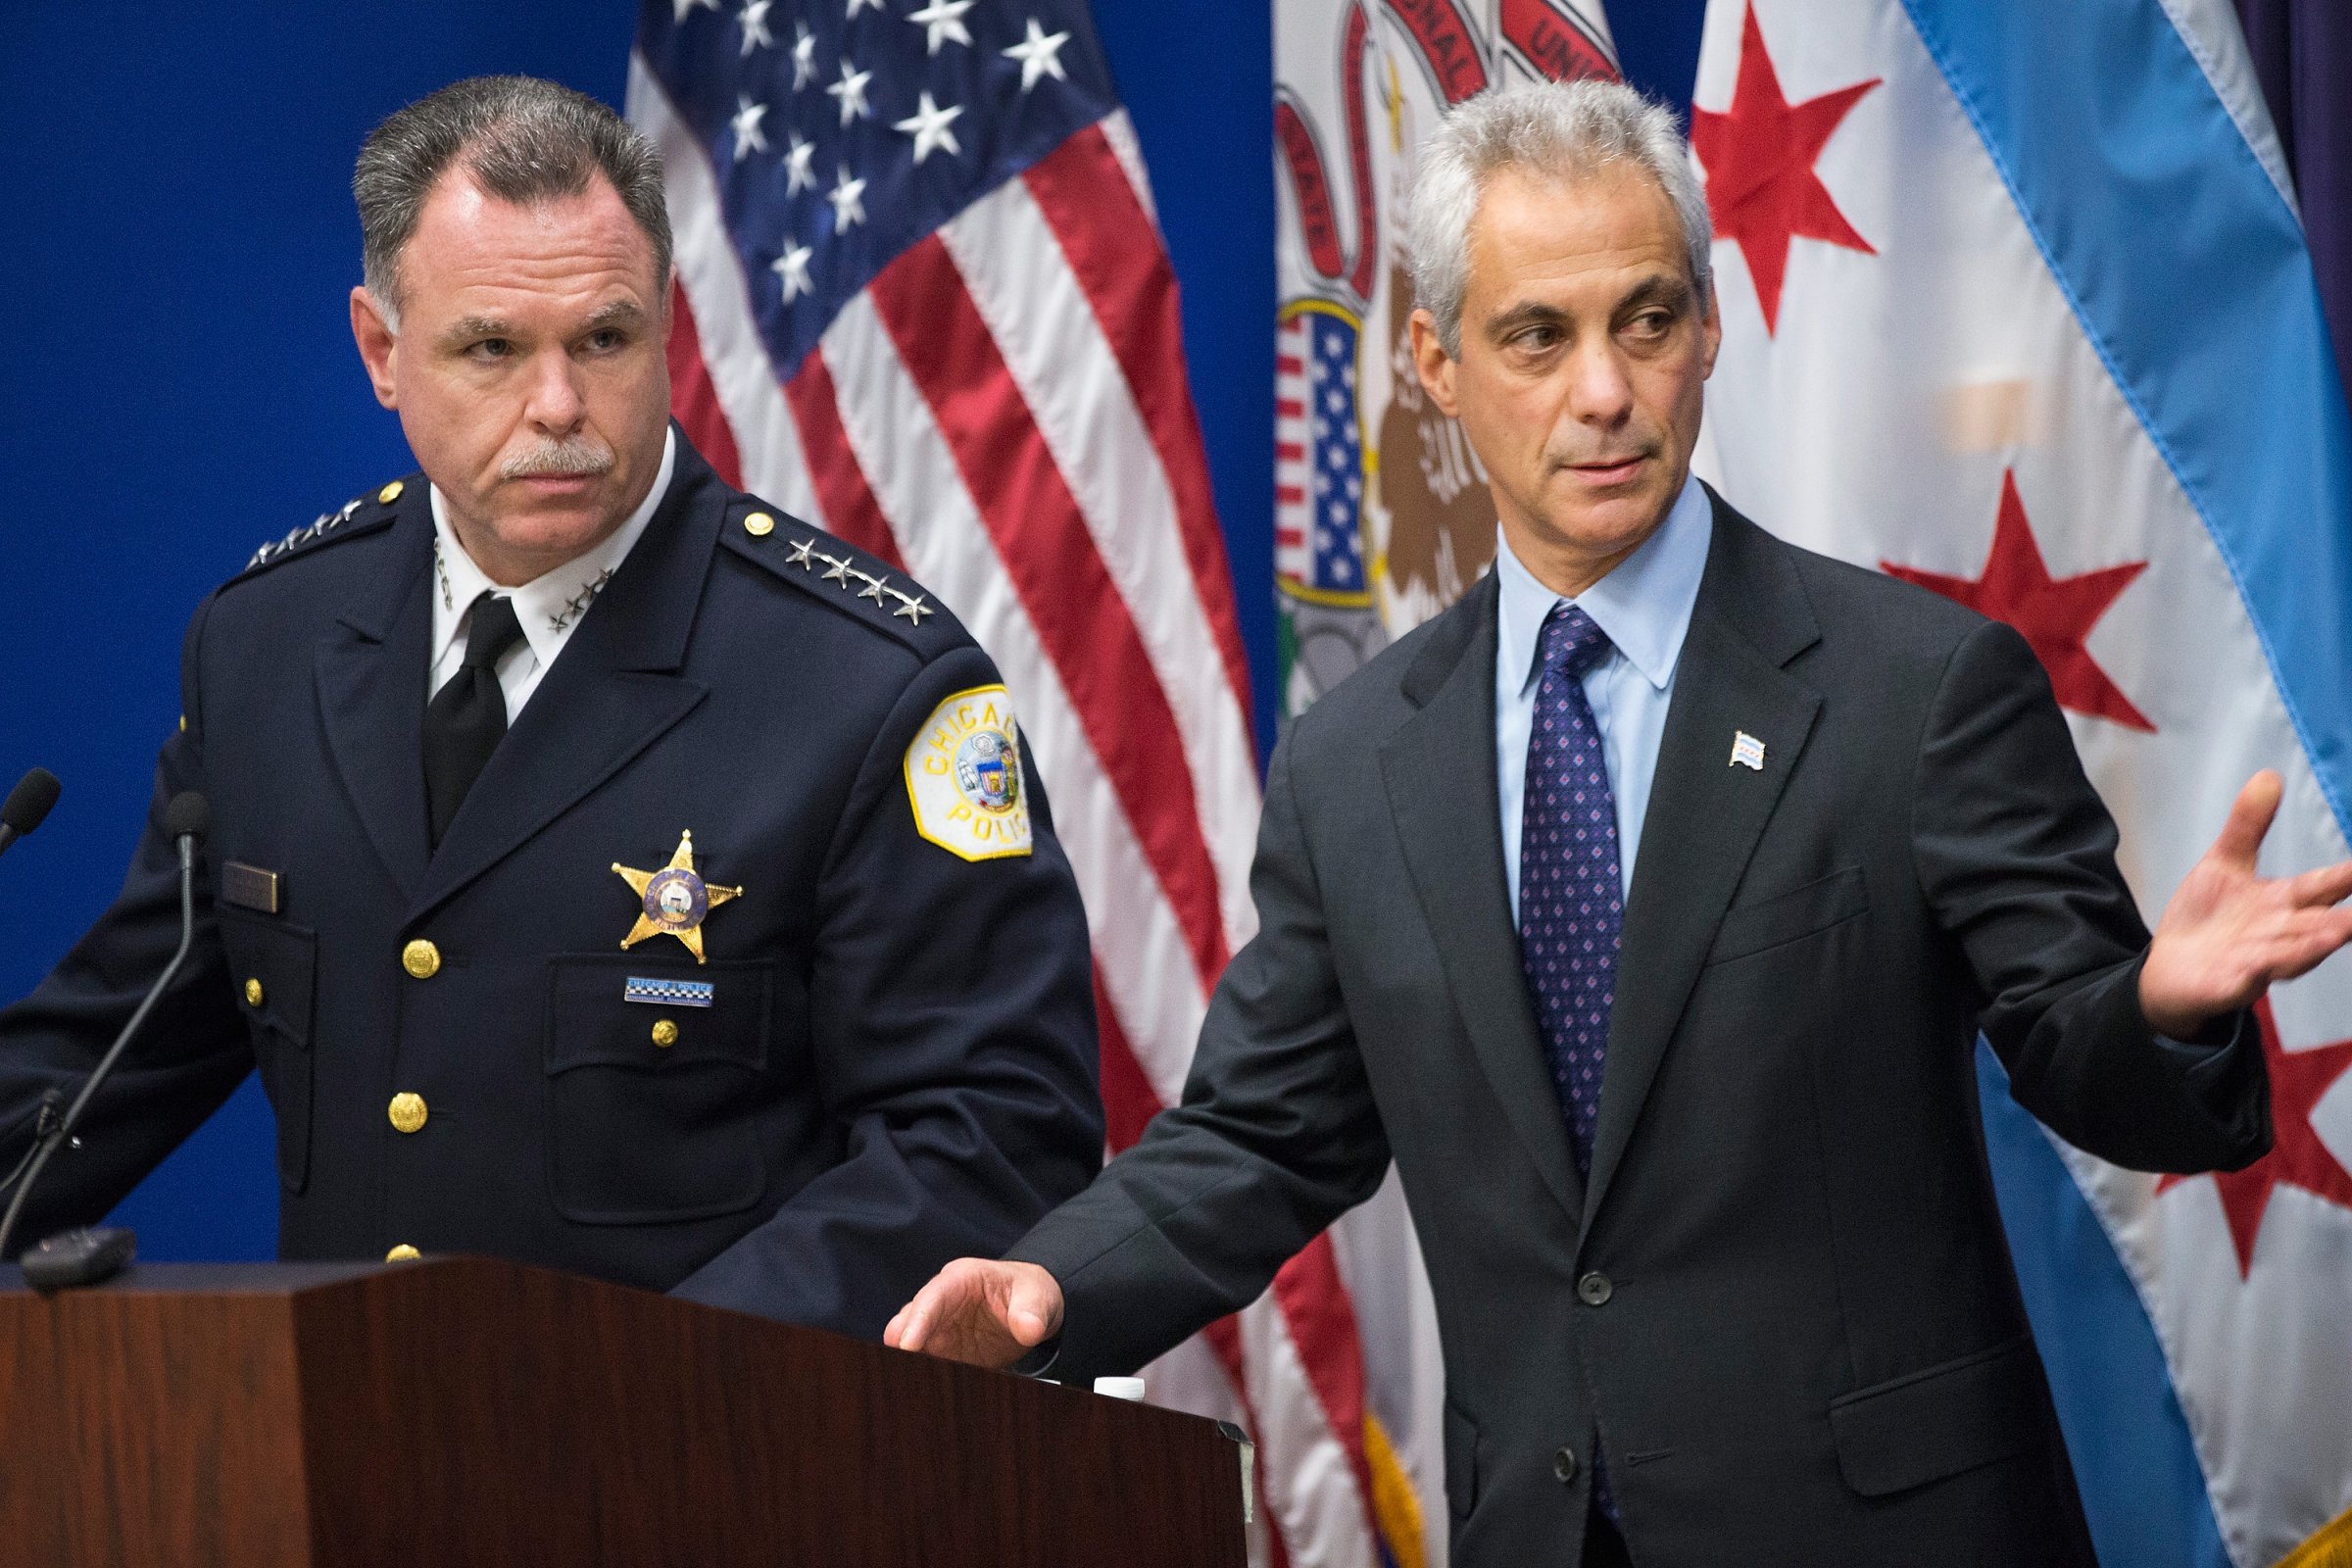 Chicago Police Superintendent Garry McCarthy (L) and Mayor Rahm Emanuel arrive for a press conference to address the arrest of Chicago Police officer Jason Van Dyke in Chicago on Nov. 24, 2015.